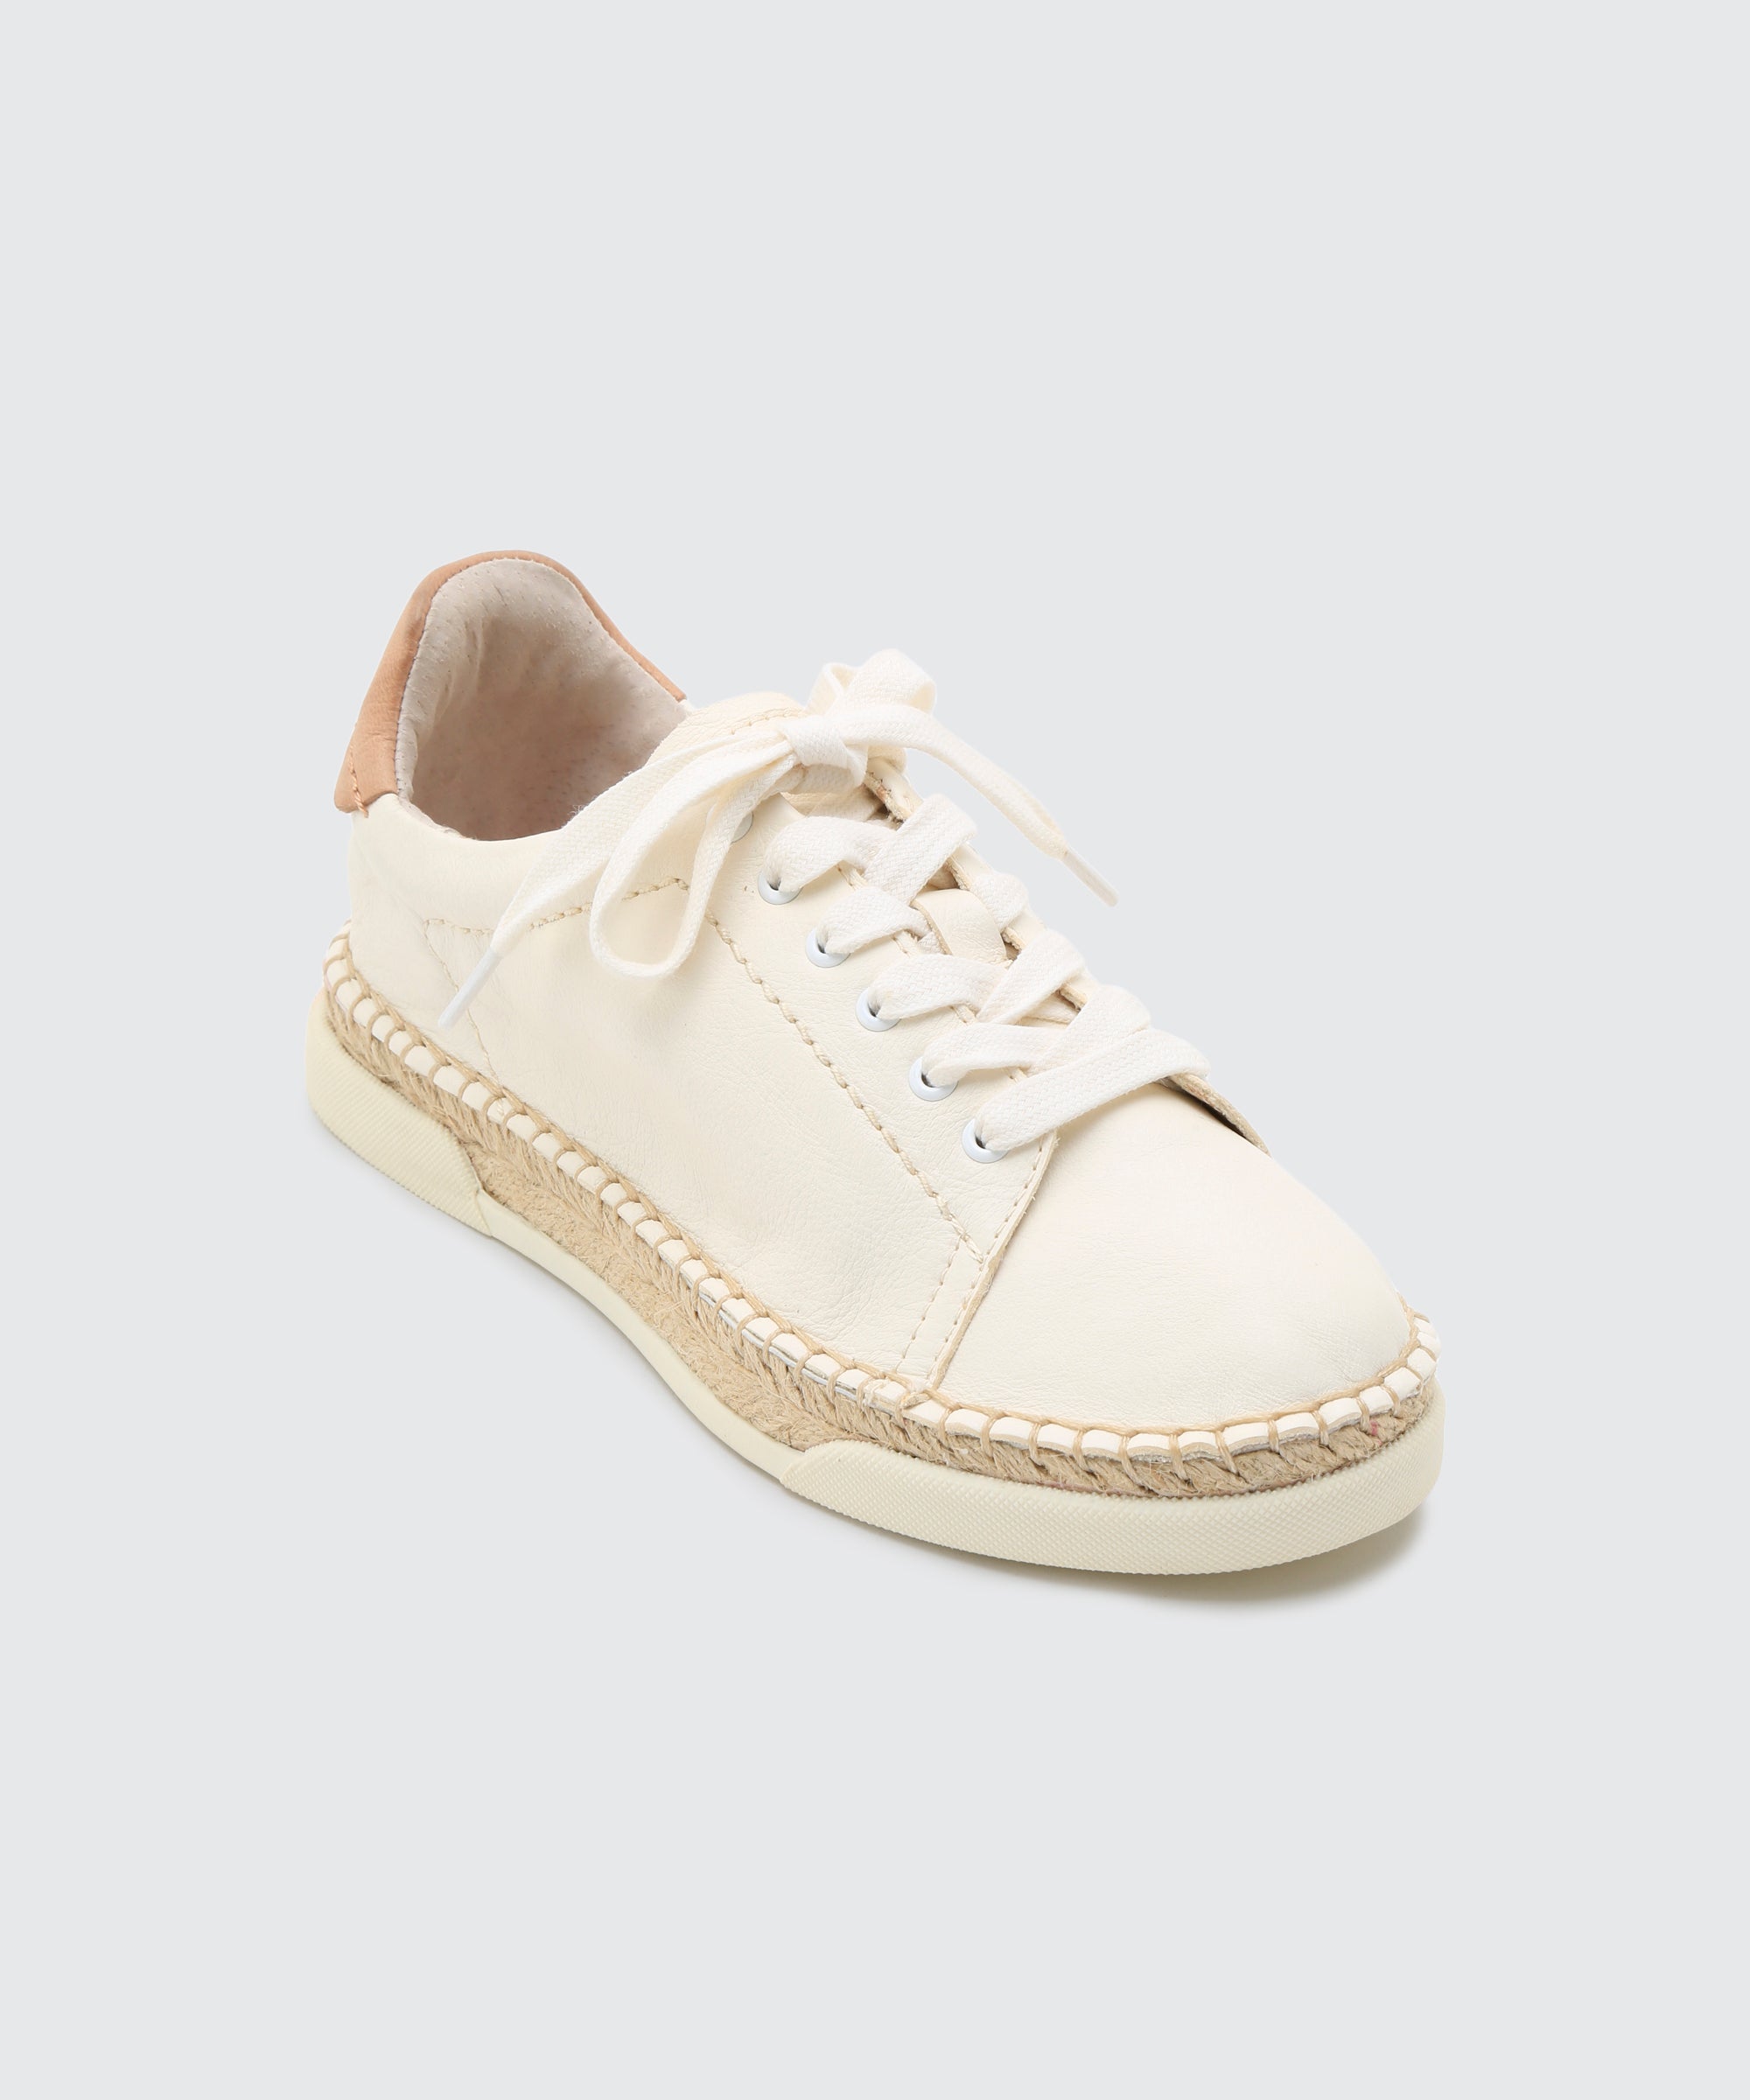 MADOX WIDE SNEAKERS IN WHITE LEATHER 